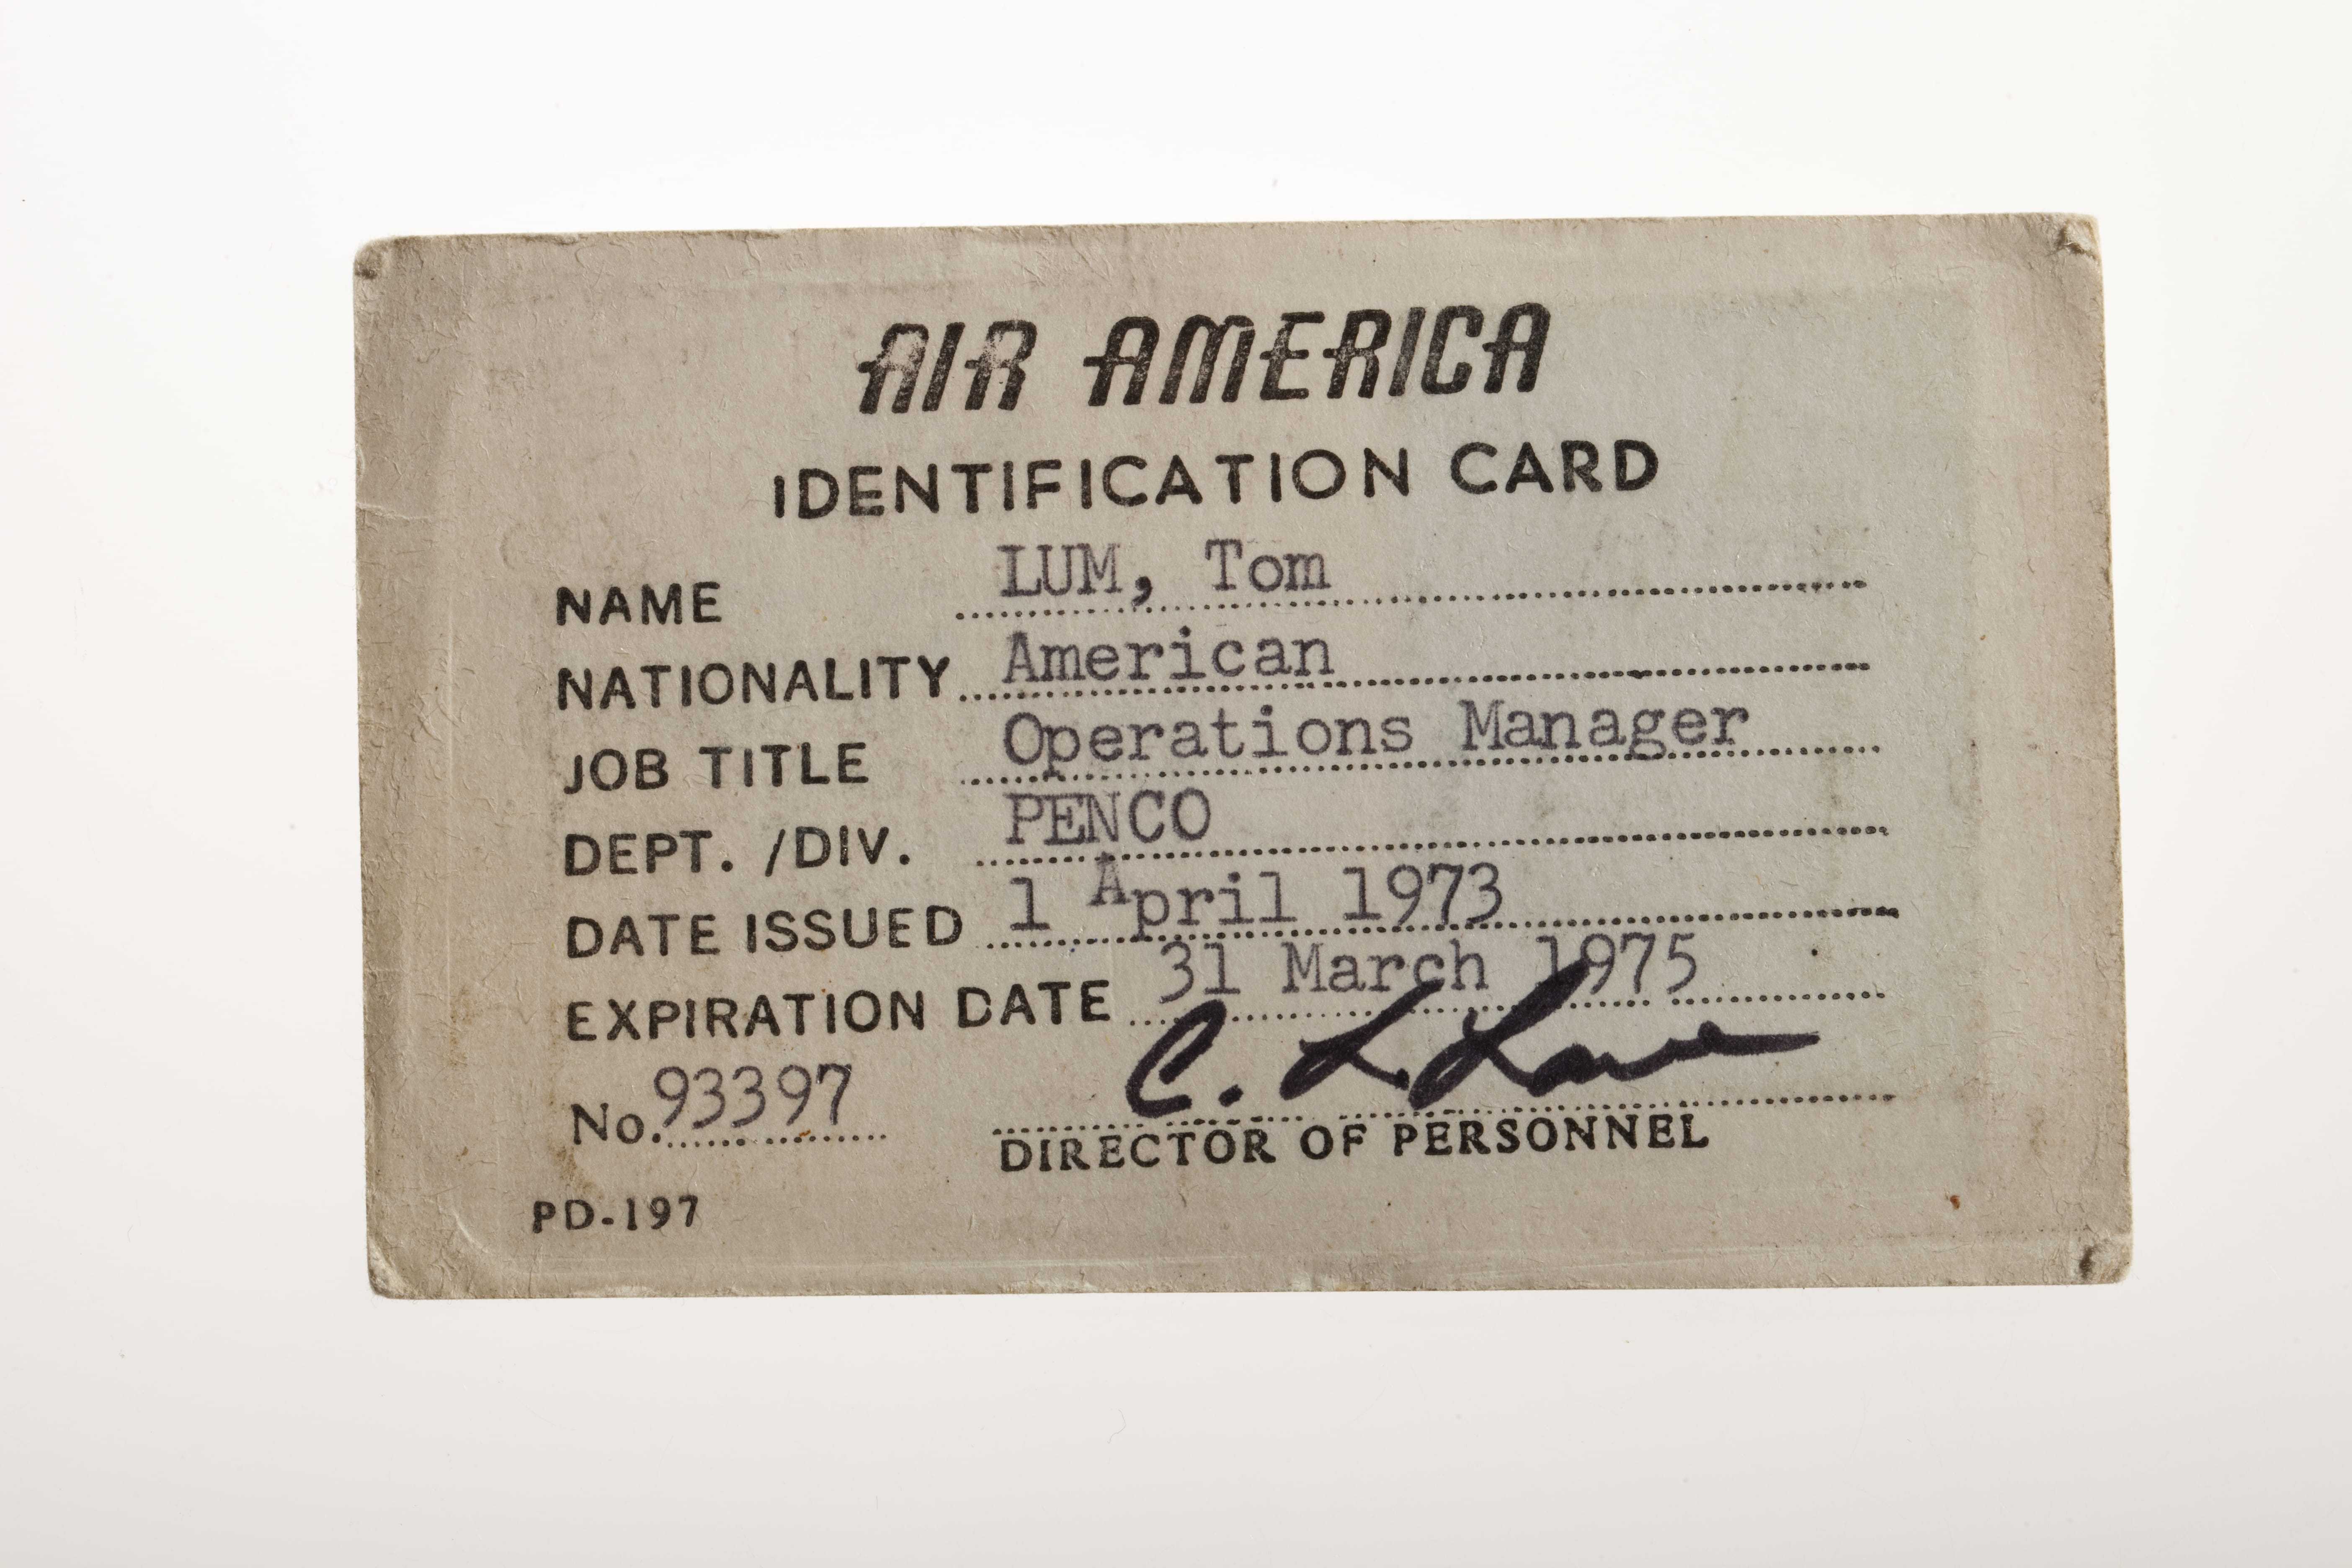 Identification card for Air America with personal details of Tom Lum filled in.